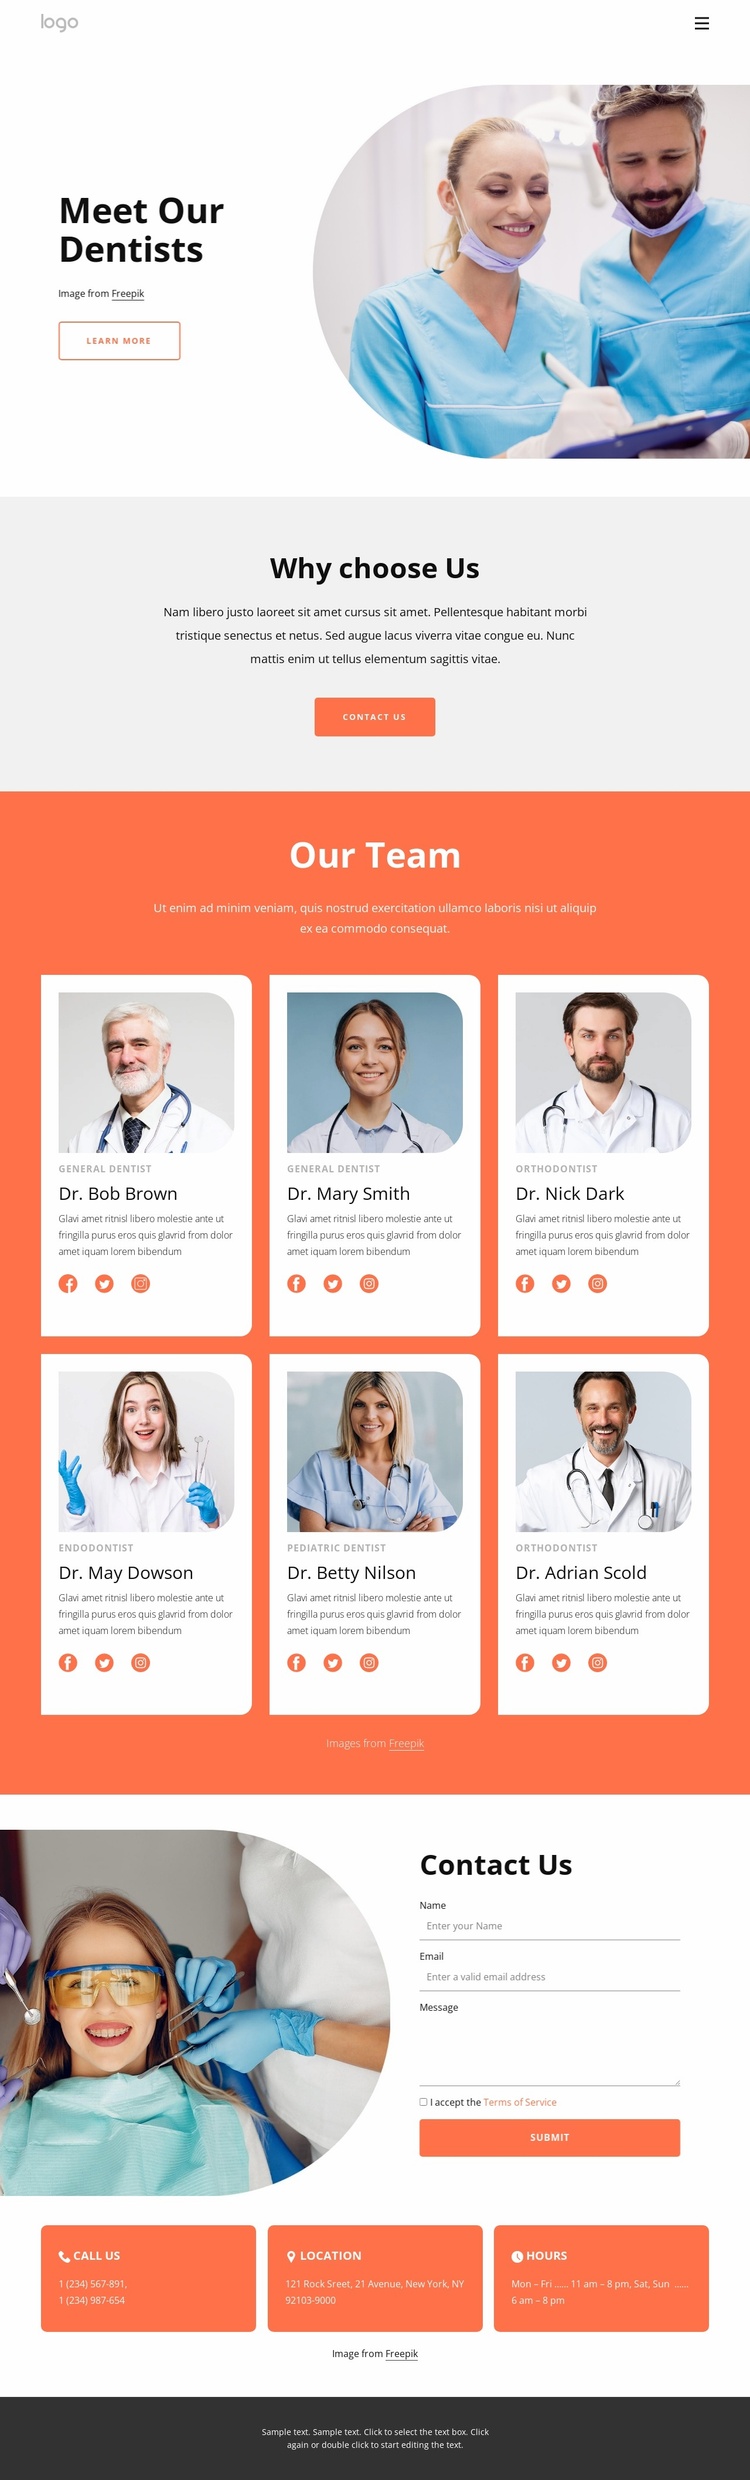 Highly-qualified dentists Website Template